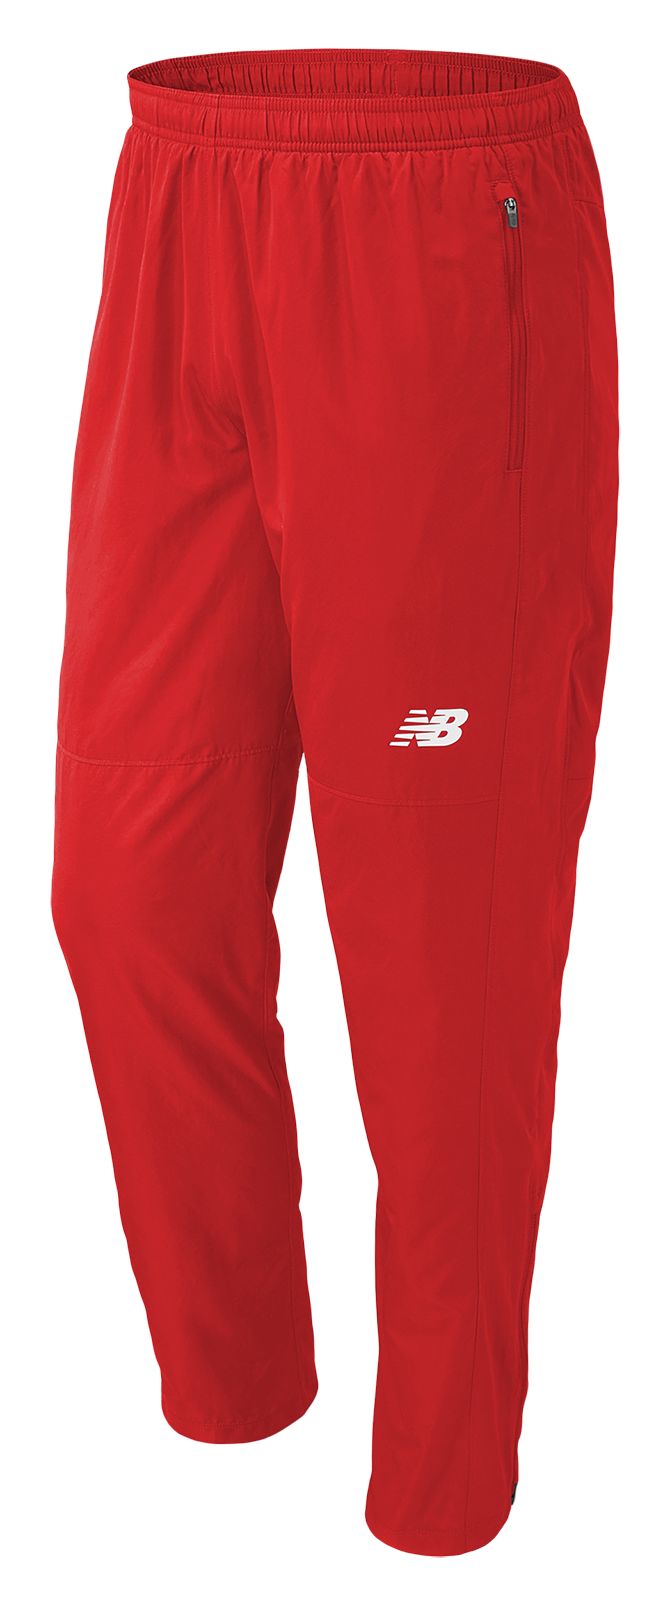 NB Athletics Splice Pant - New Balance  Sport clothing brands, Mens athletic  pants, Mens fashion casual outfits